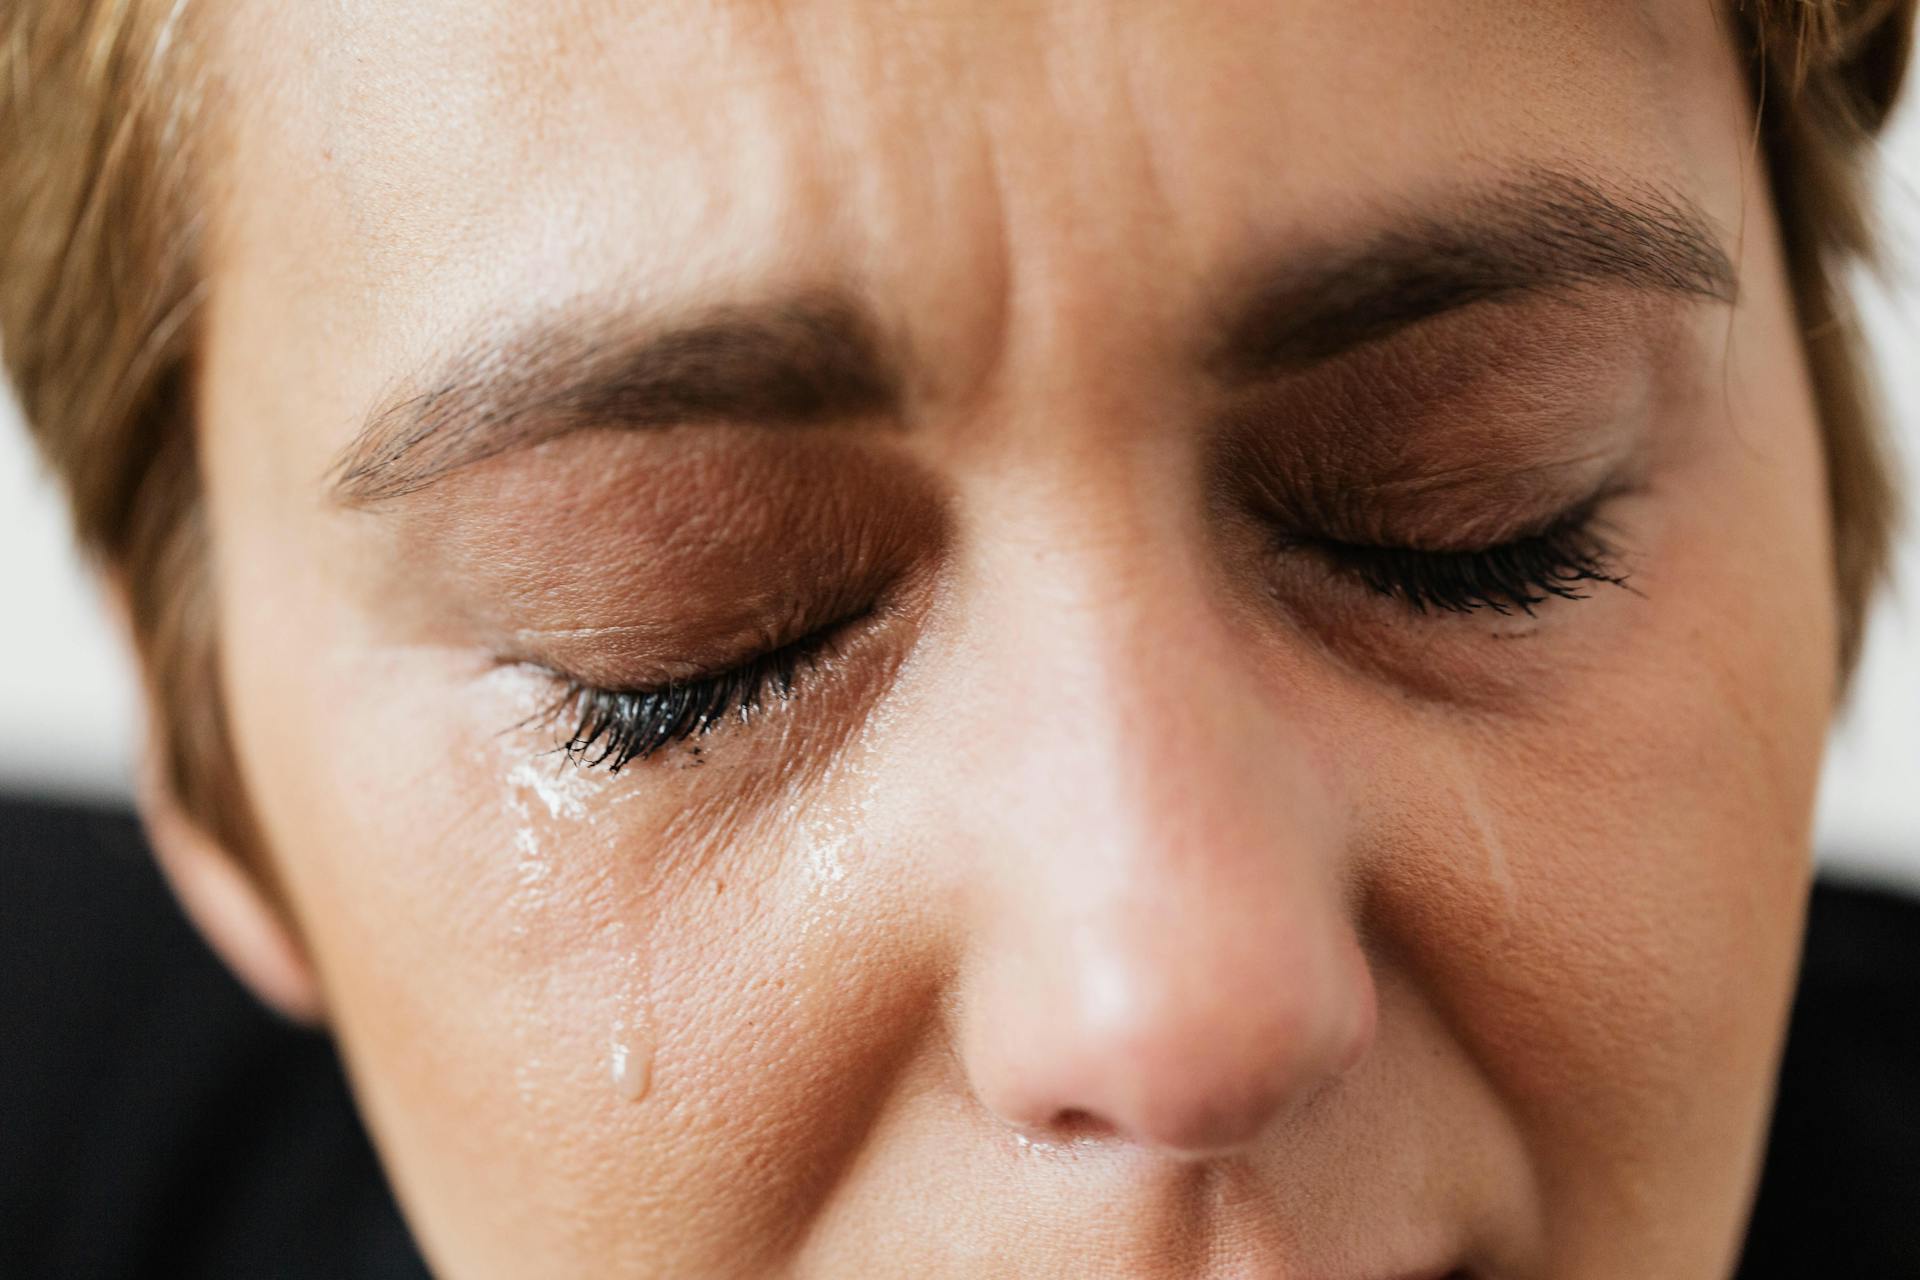 A mature woman crying | Source: Pexels